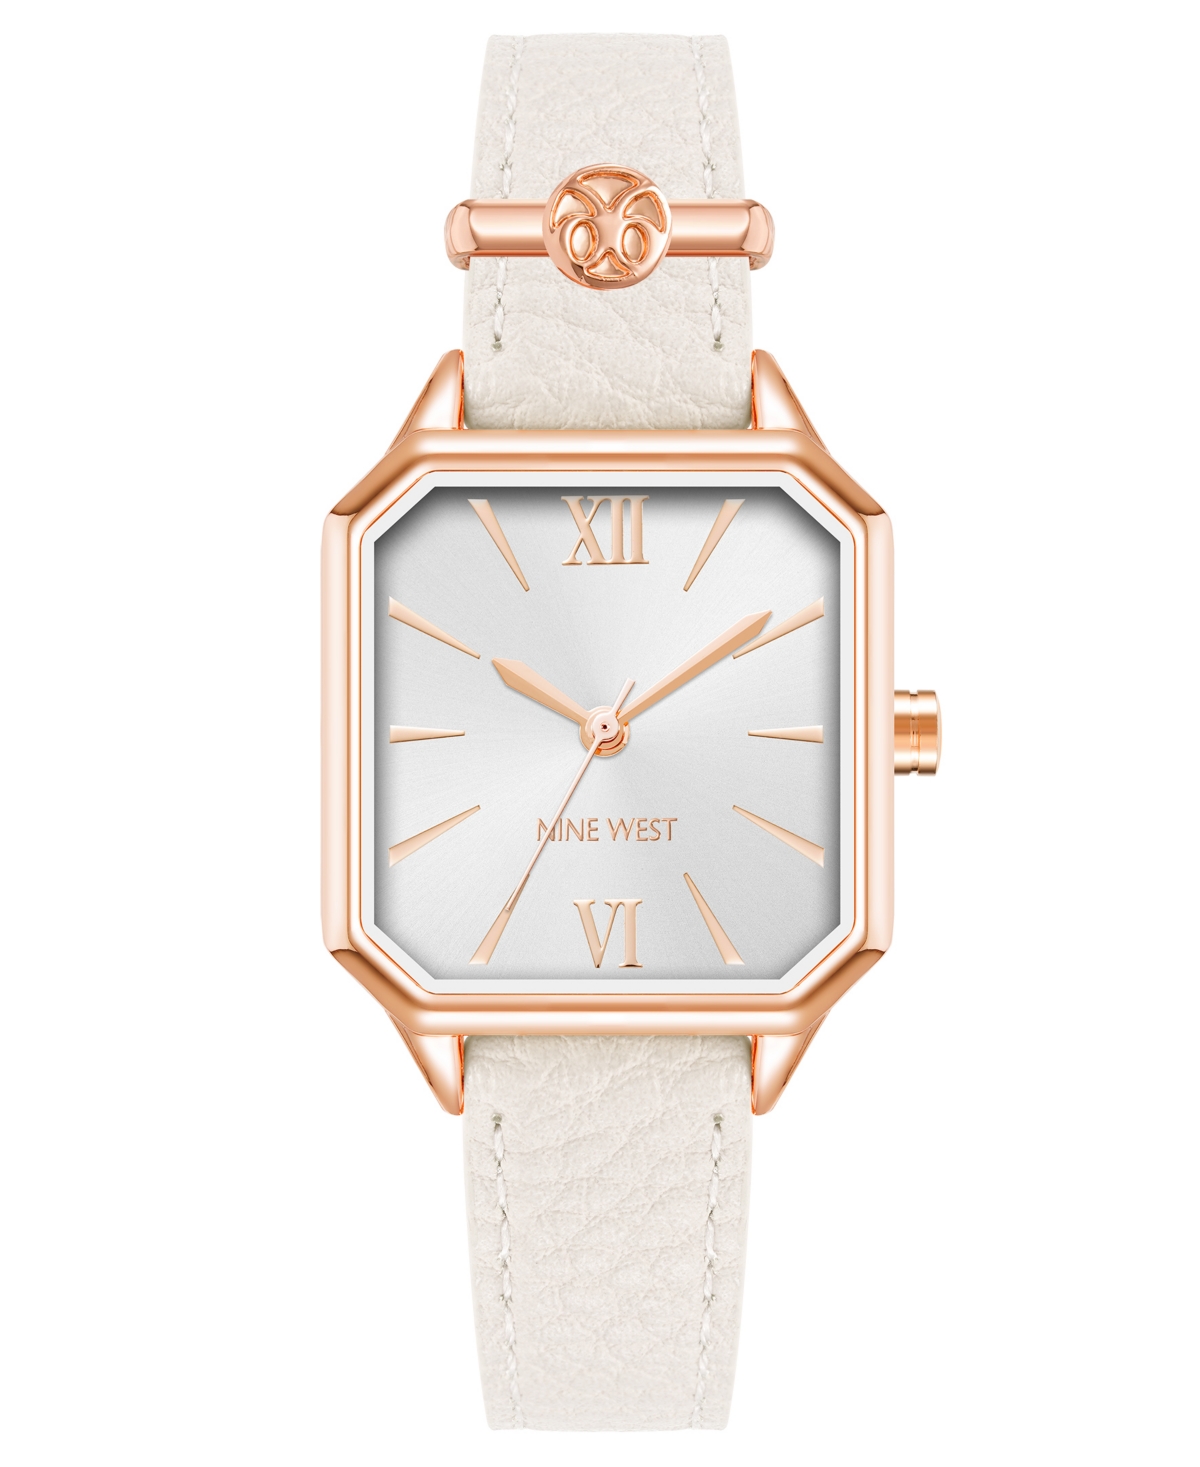 Nine West Women's Quartz Square White Faux Leather Band Watch, 27mm In White,rose Gold-tone